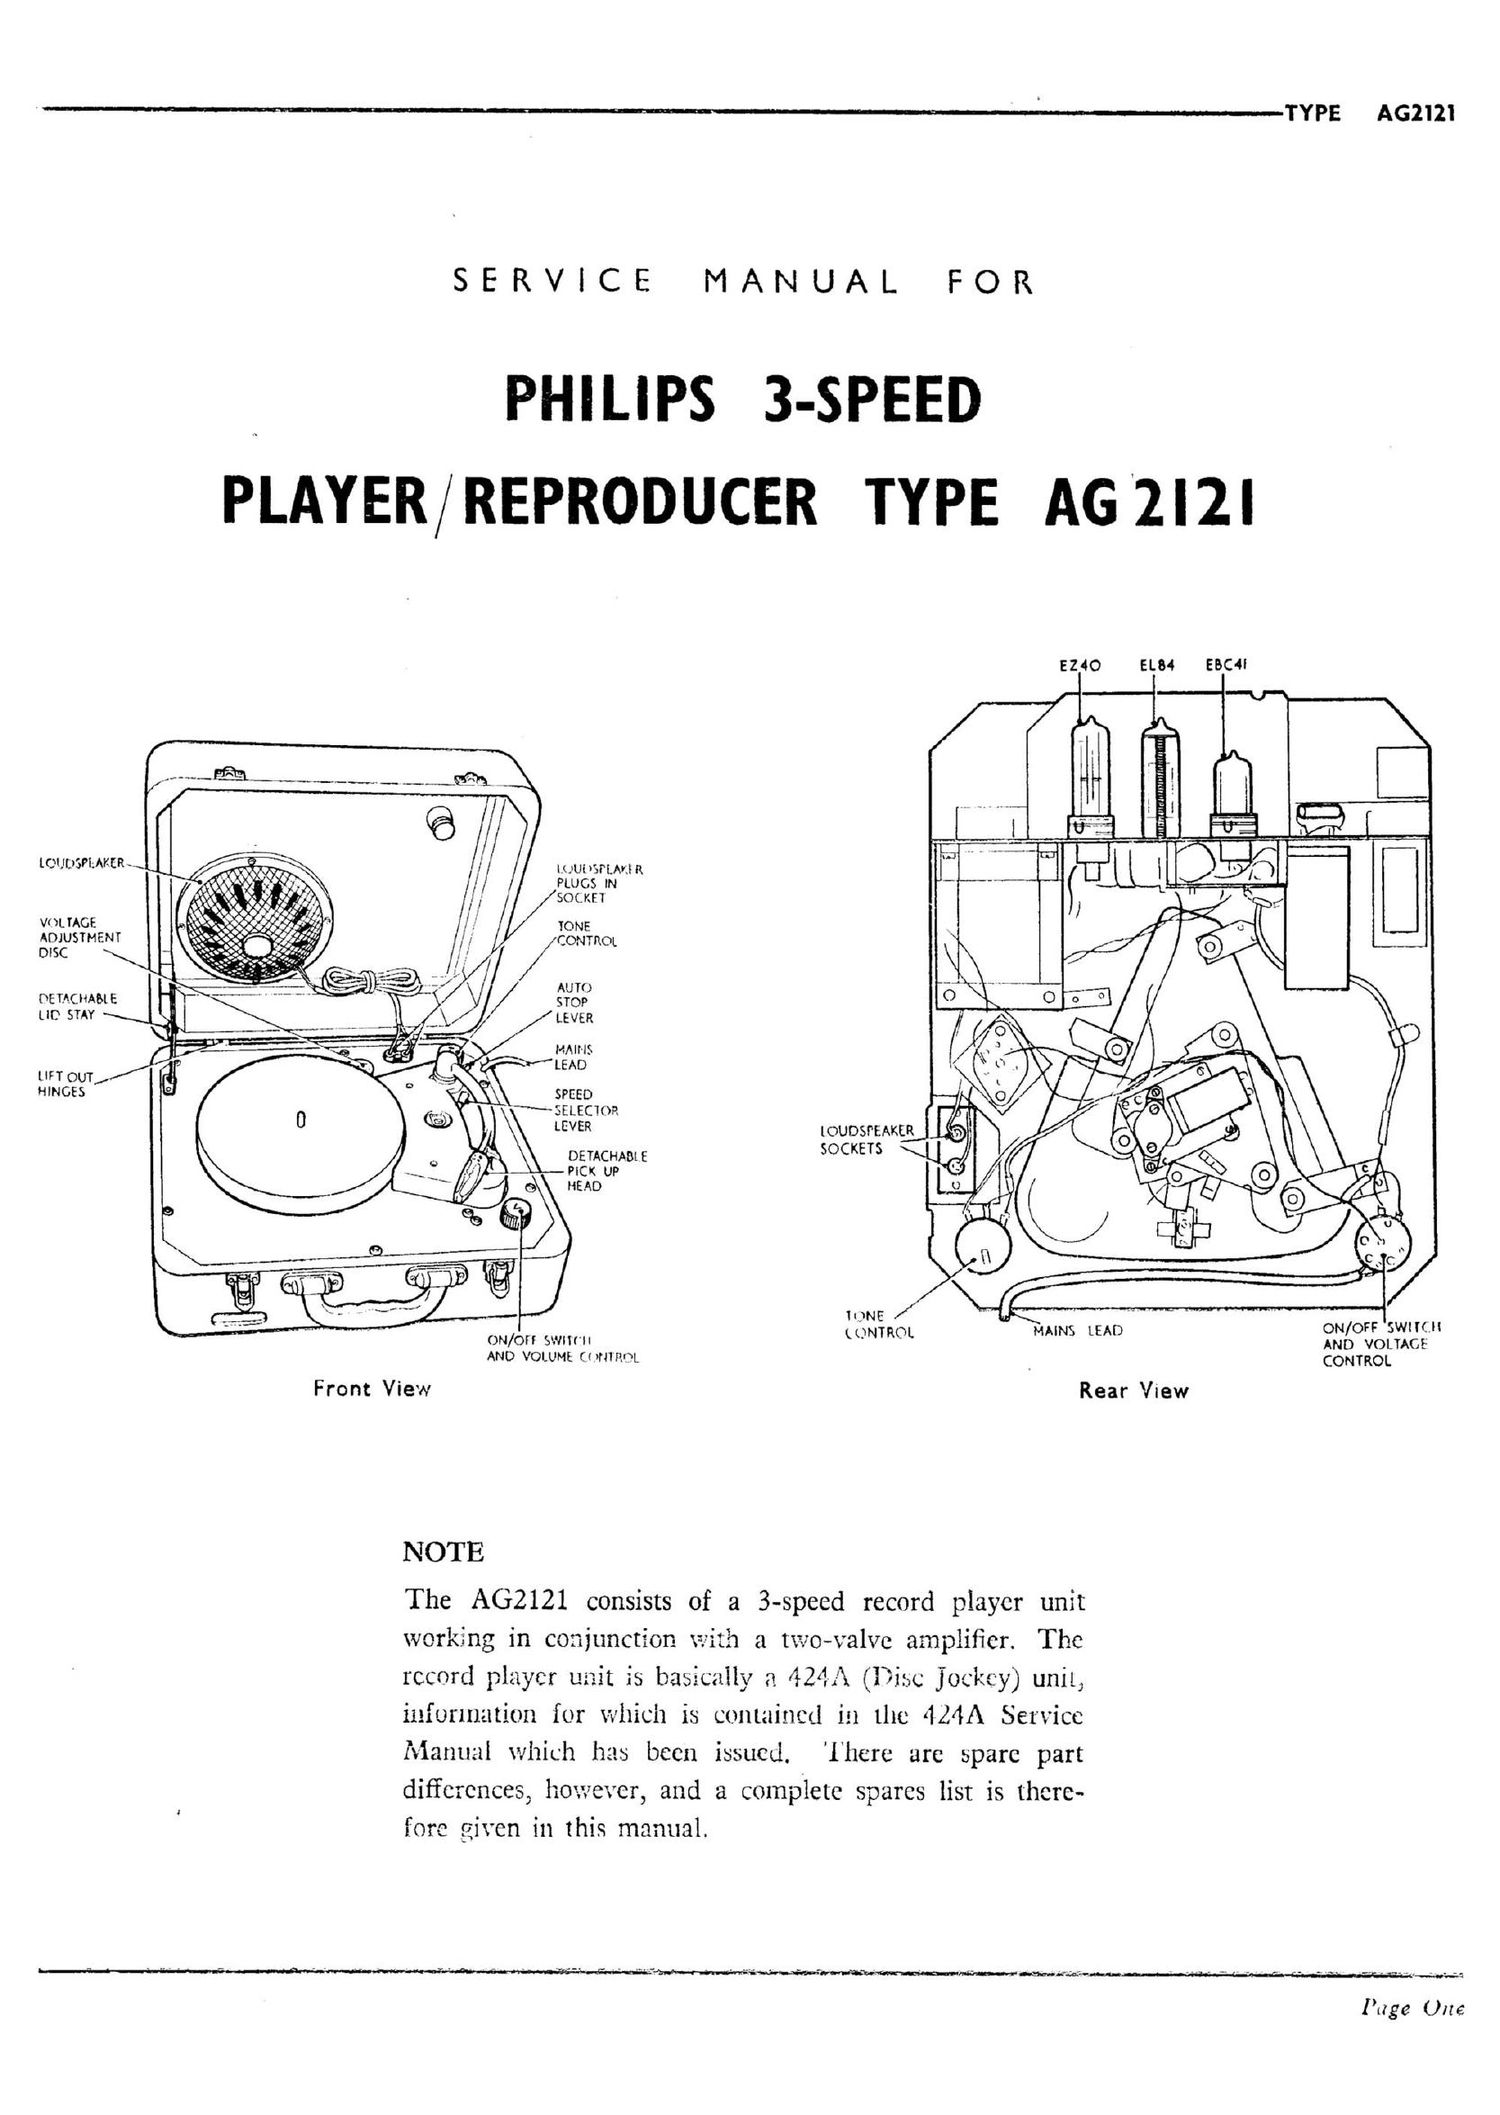 philips ag 2121 service manual